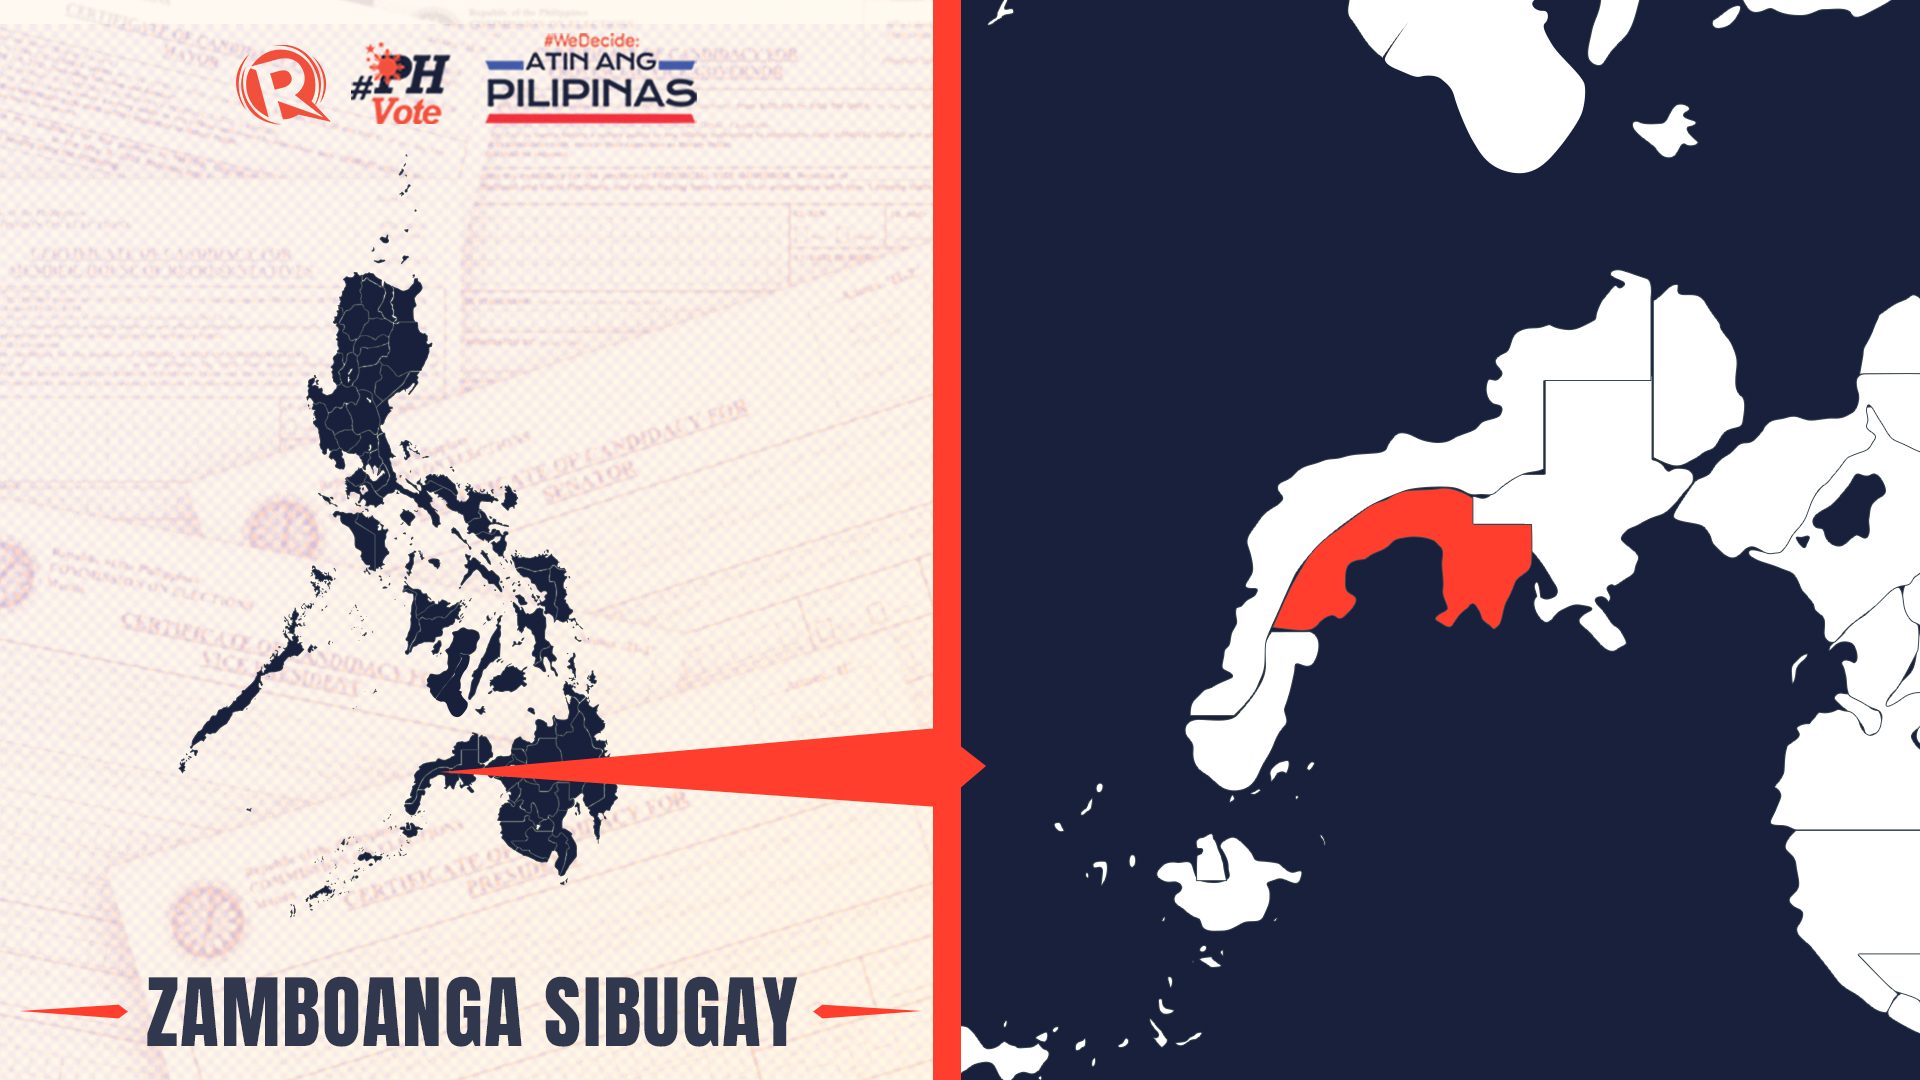 LIST: Who is running in Zamboanga Sibugay in the 2022 Philippine elections?